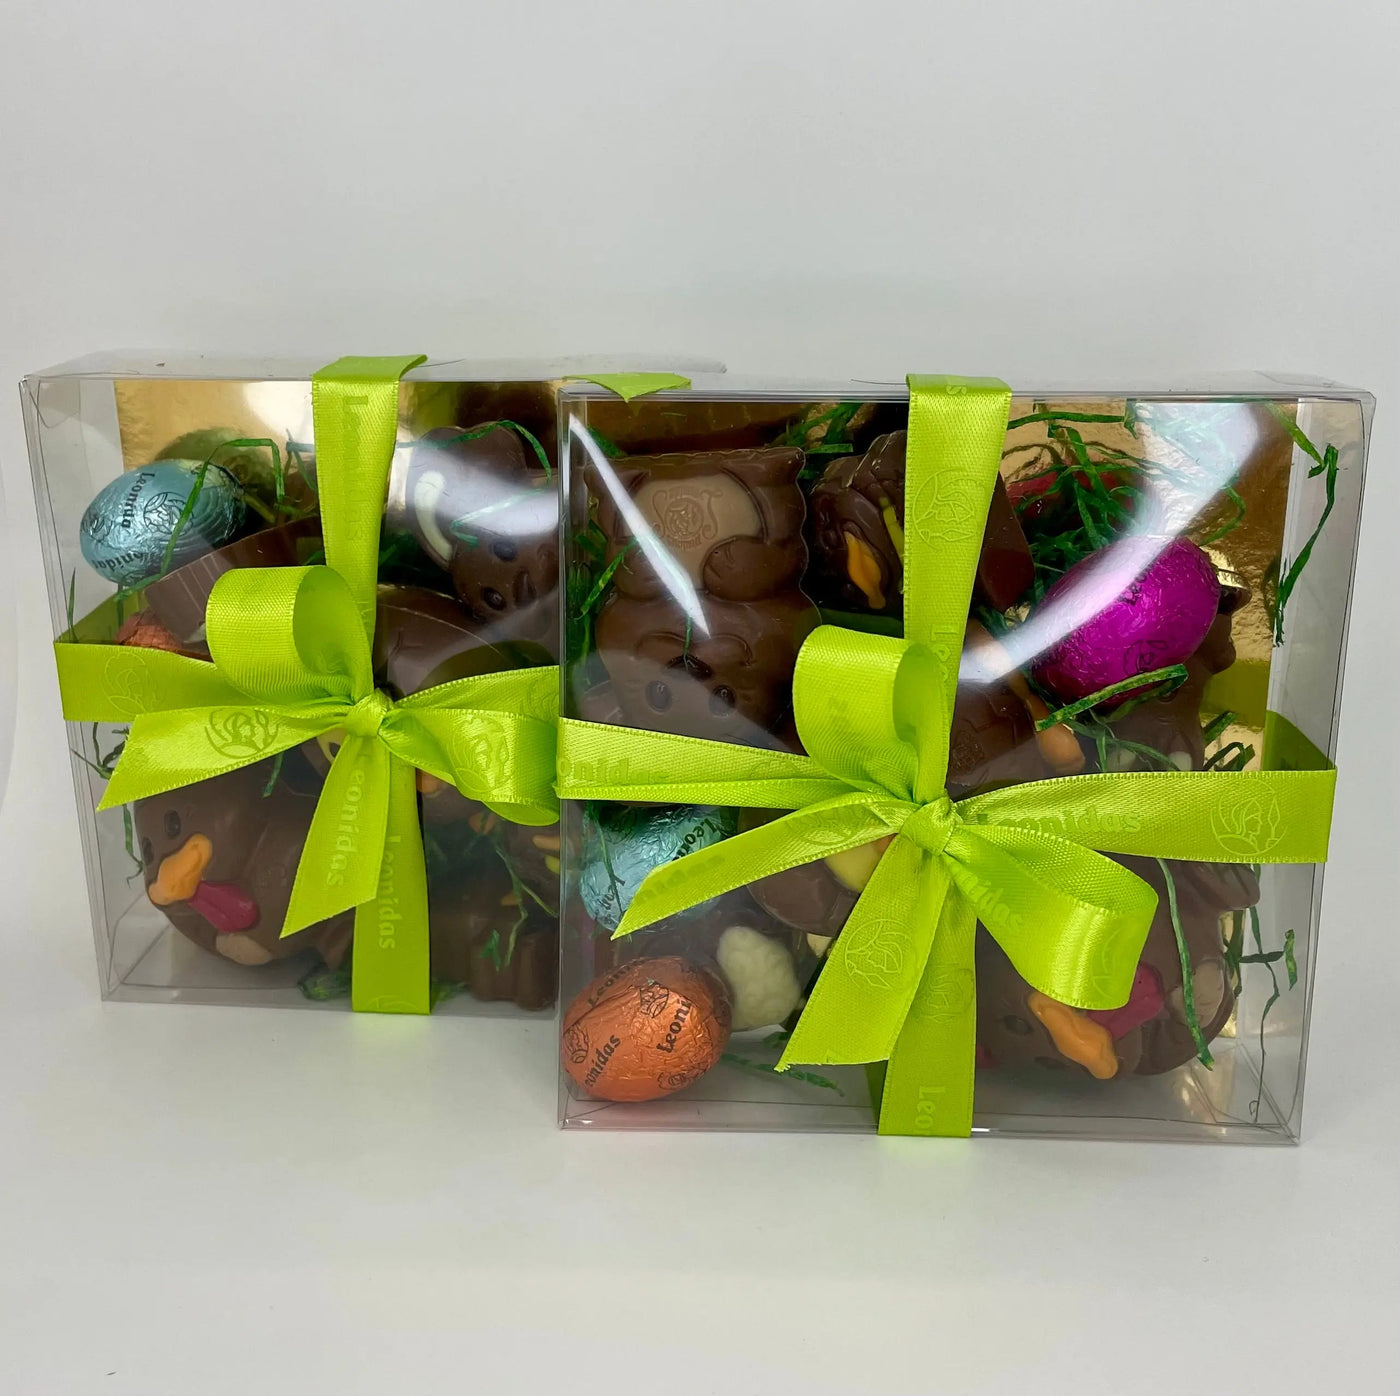 Leonidas Easter Set of 2 Small Plexi Box with Milk Chocolate Novelty and Assorted Mini Eggs, 230g Approx Leonidas Kensington